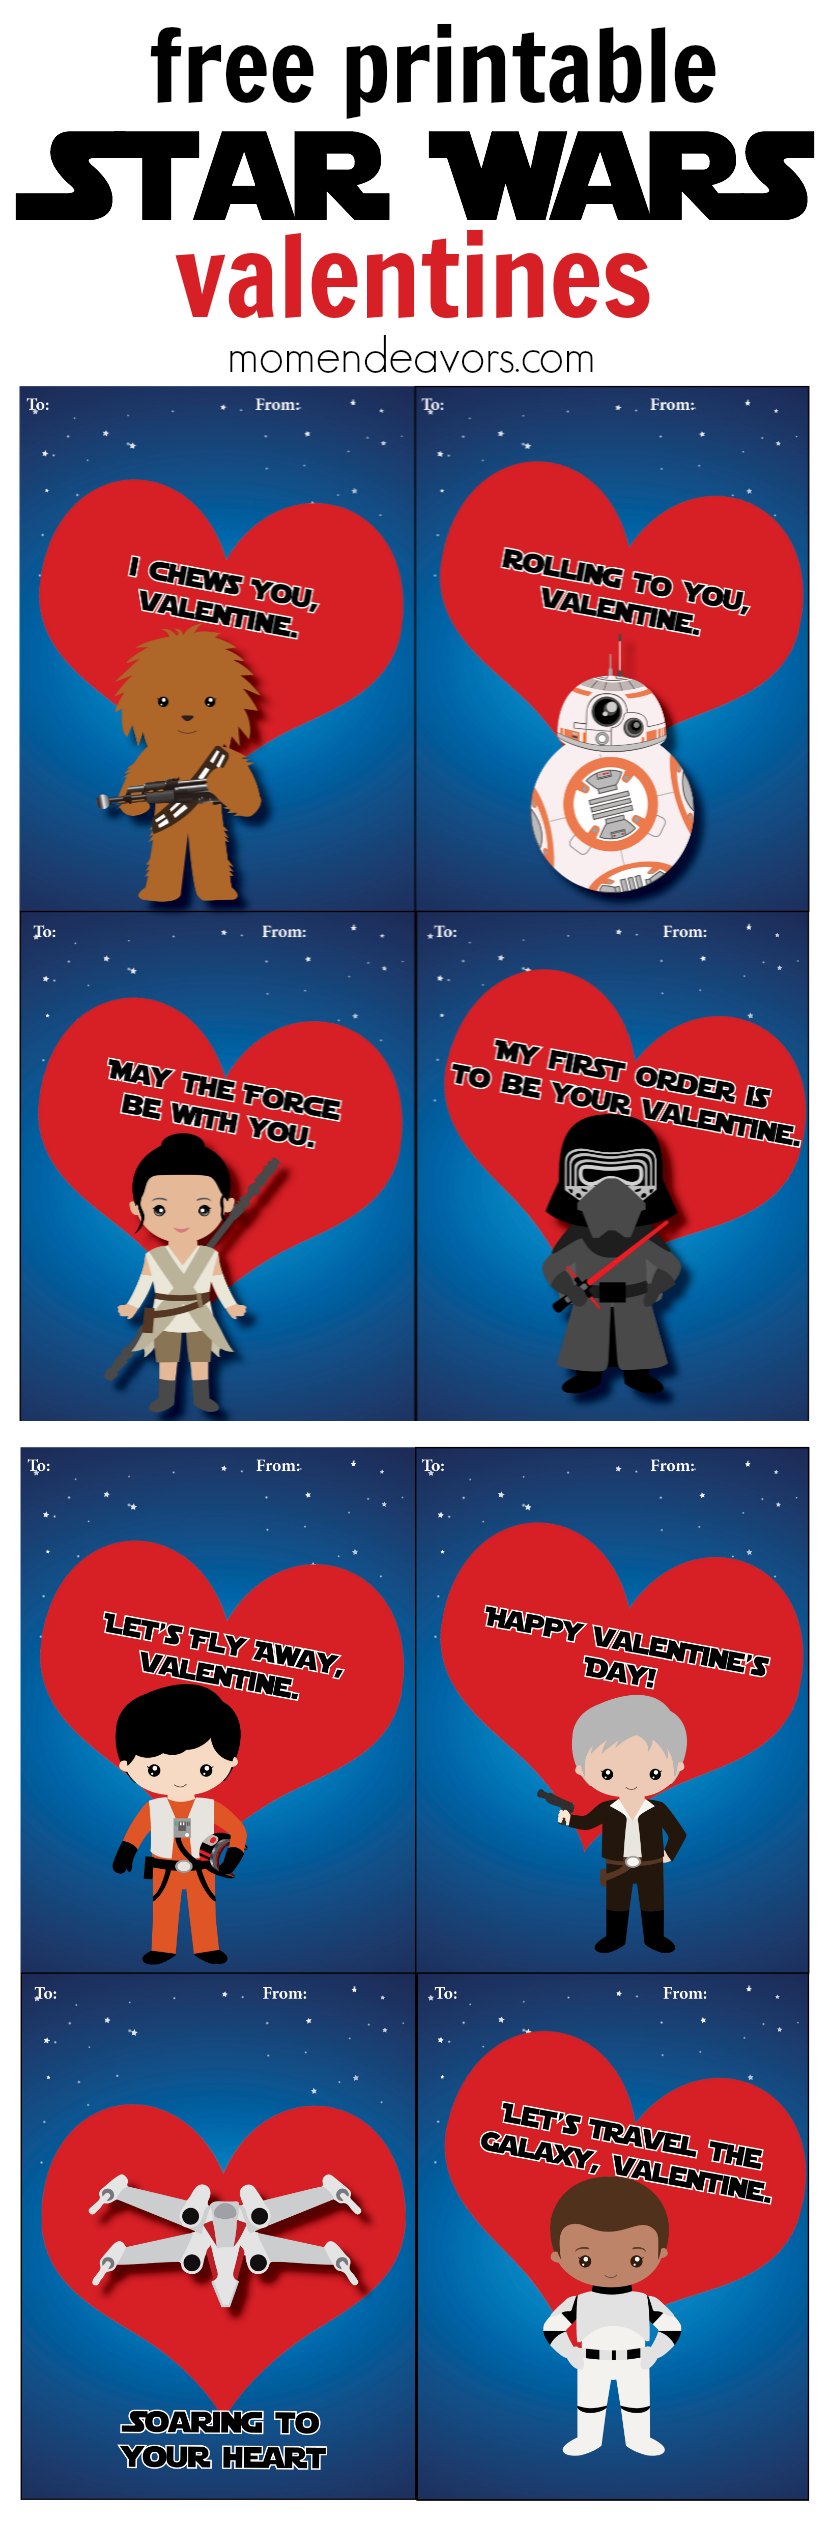 Free Printable Star Wars The Force Awakens Cute Valentine’s Cards